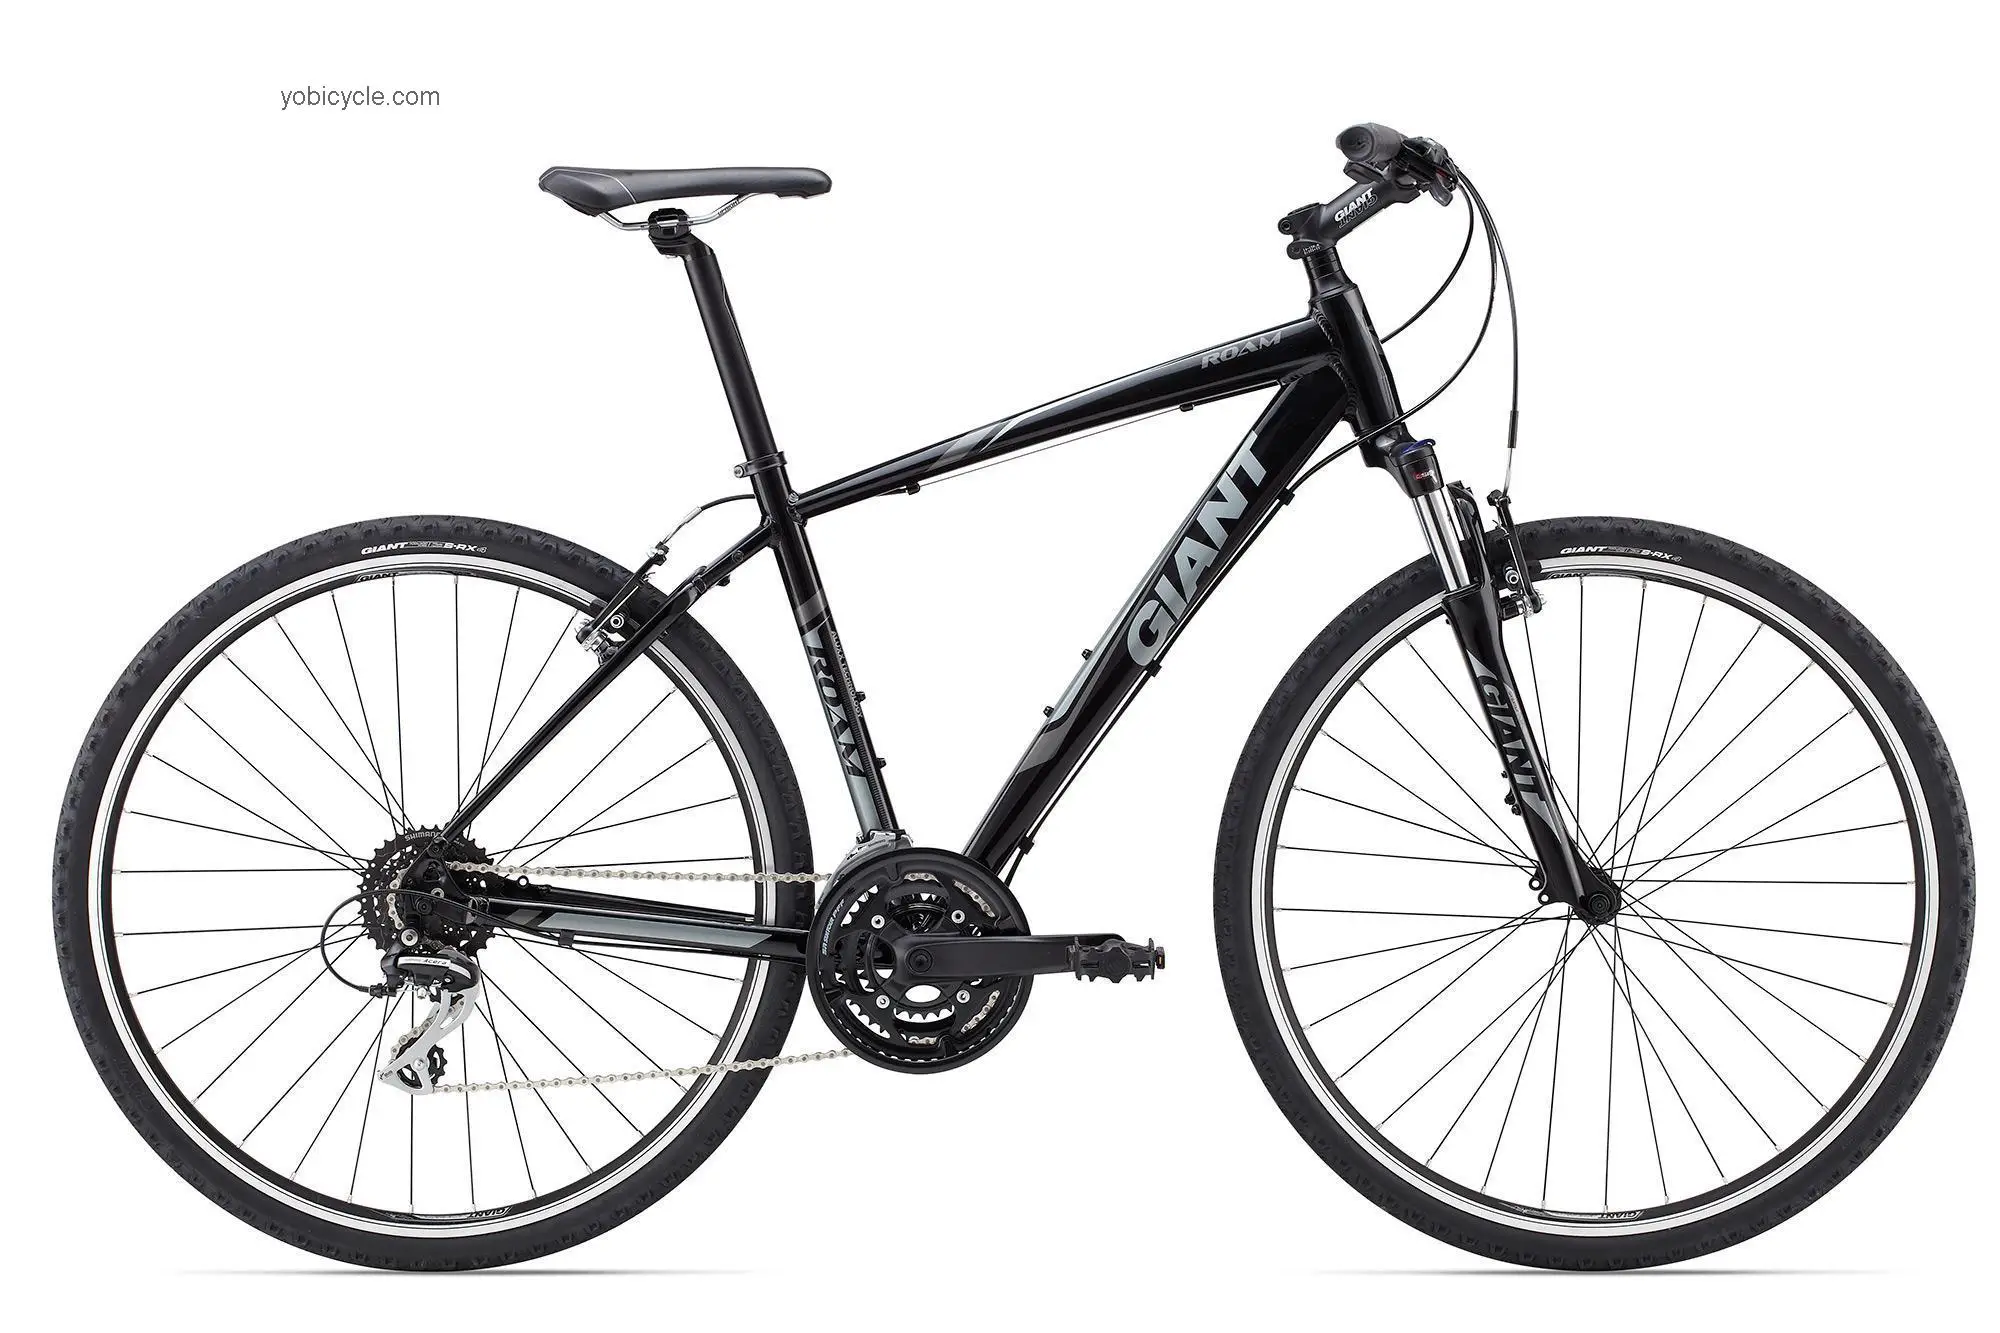 Giant Roam 3 2015 comparison online with competitors